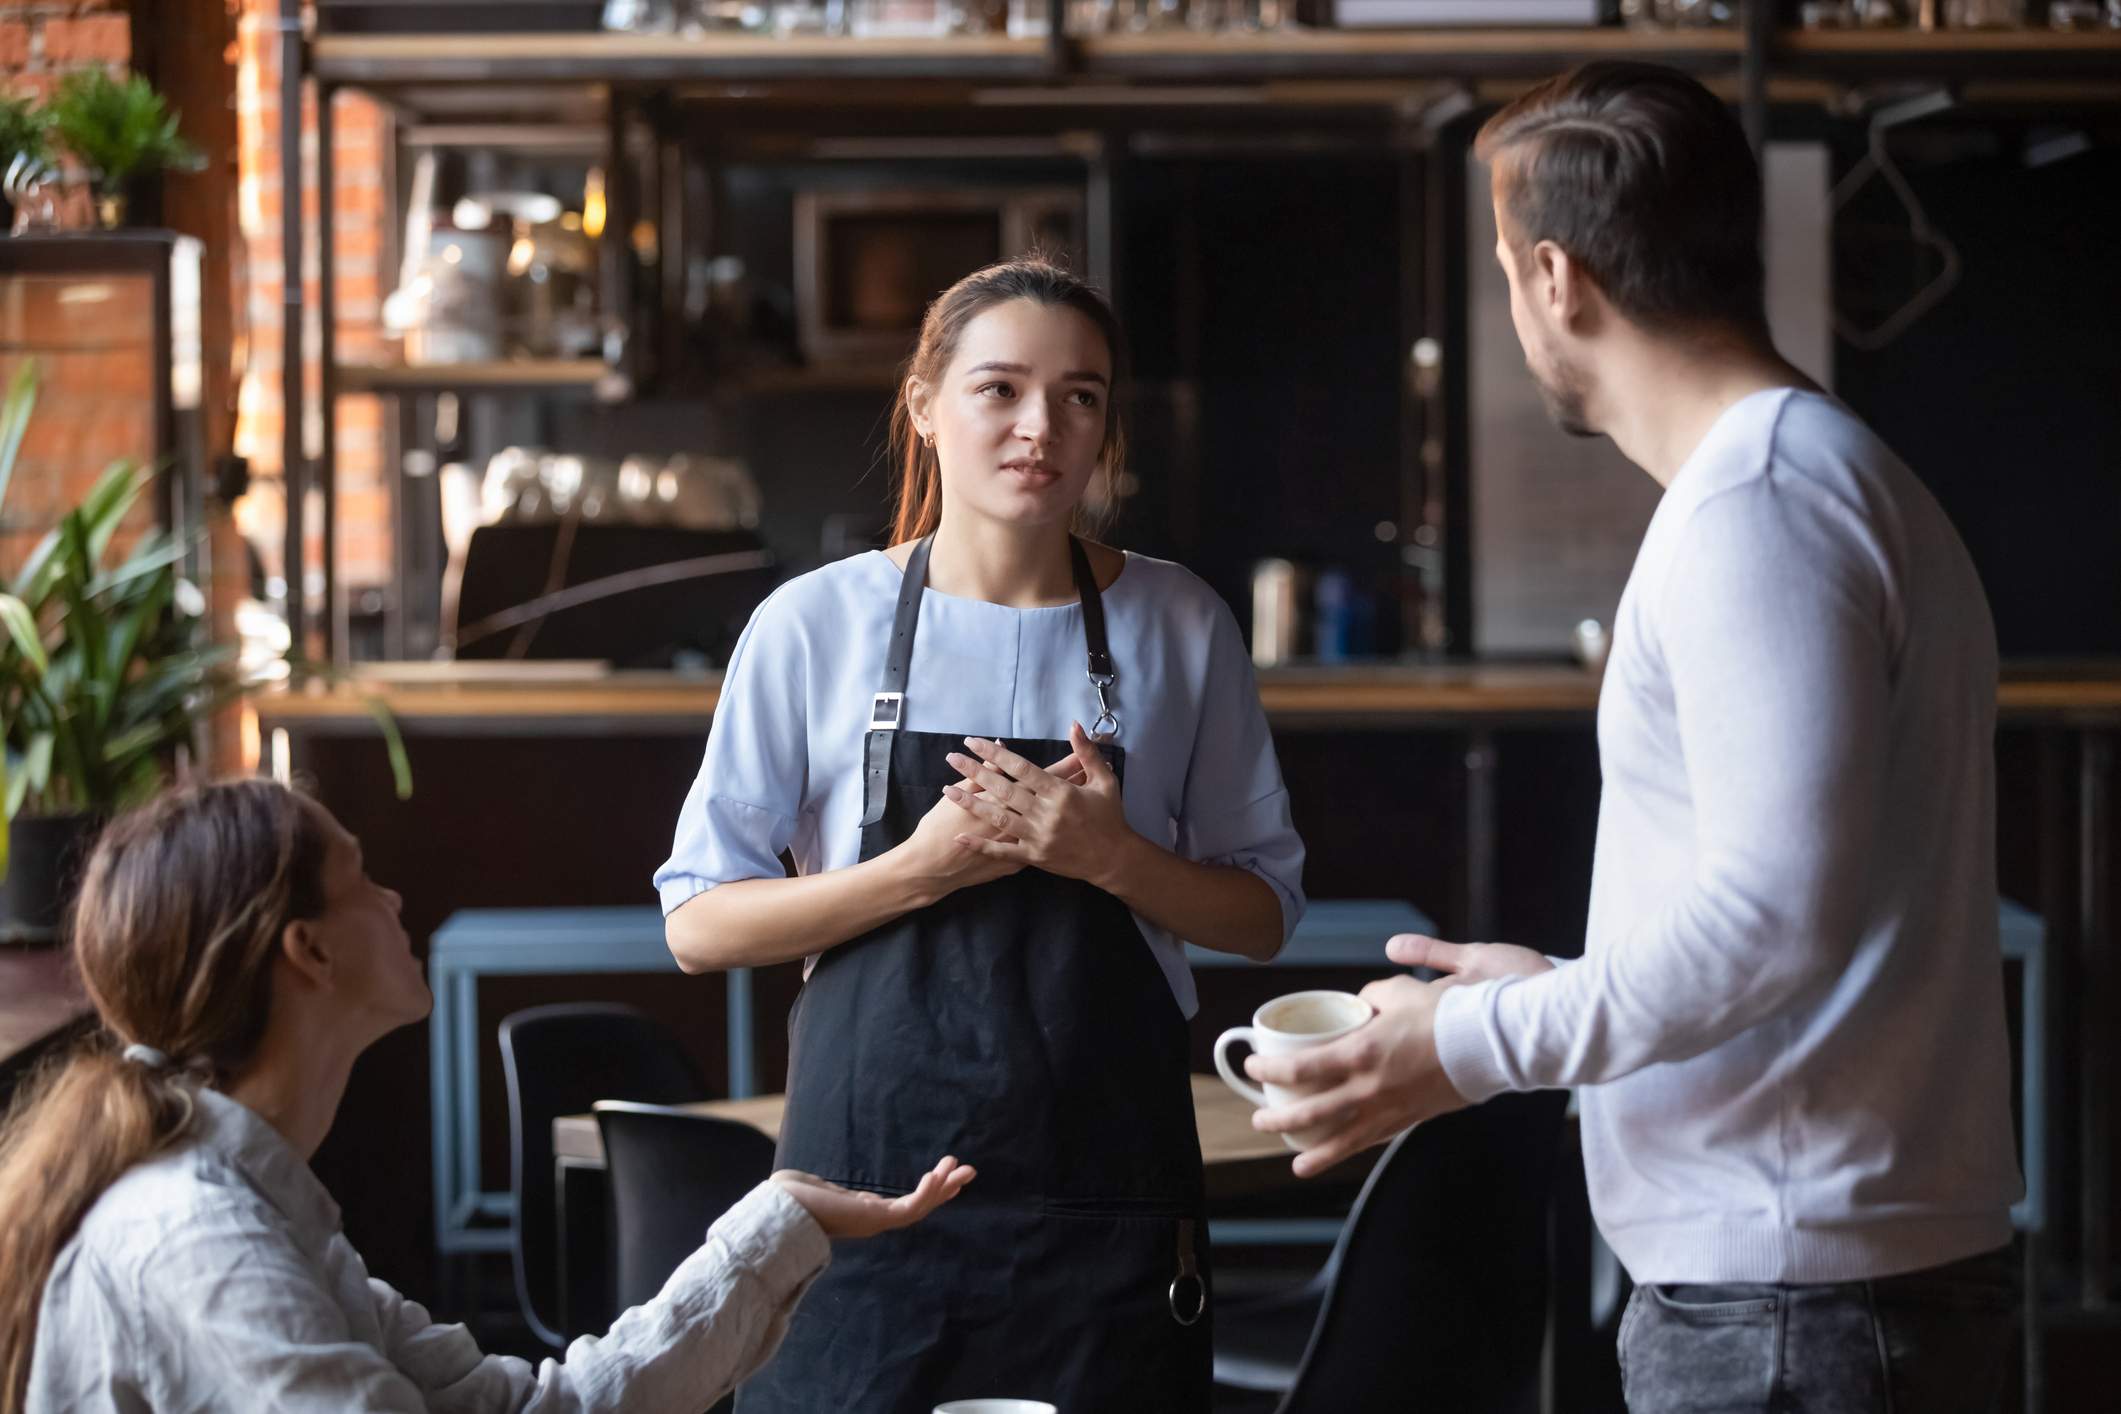 How to handle restaurant complaints and turn them into hospitality wins